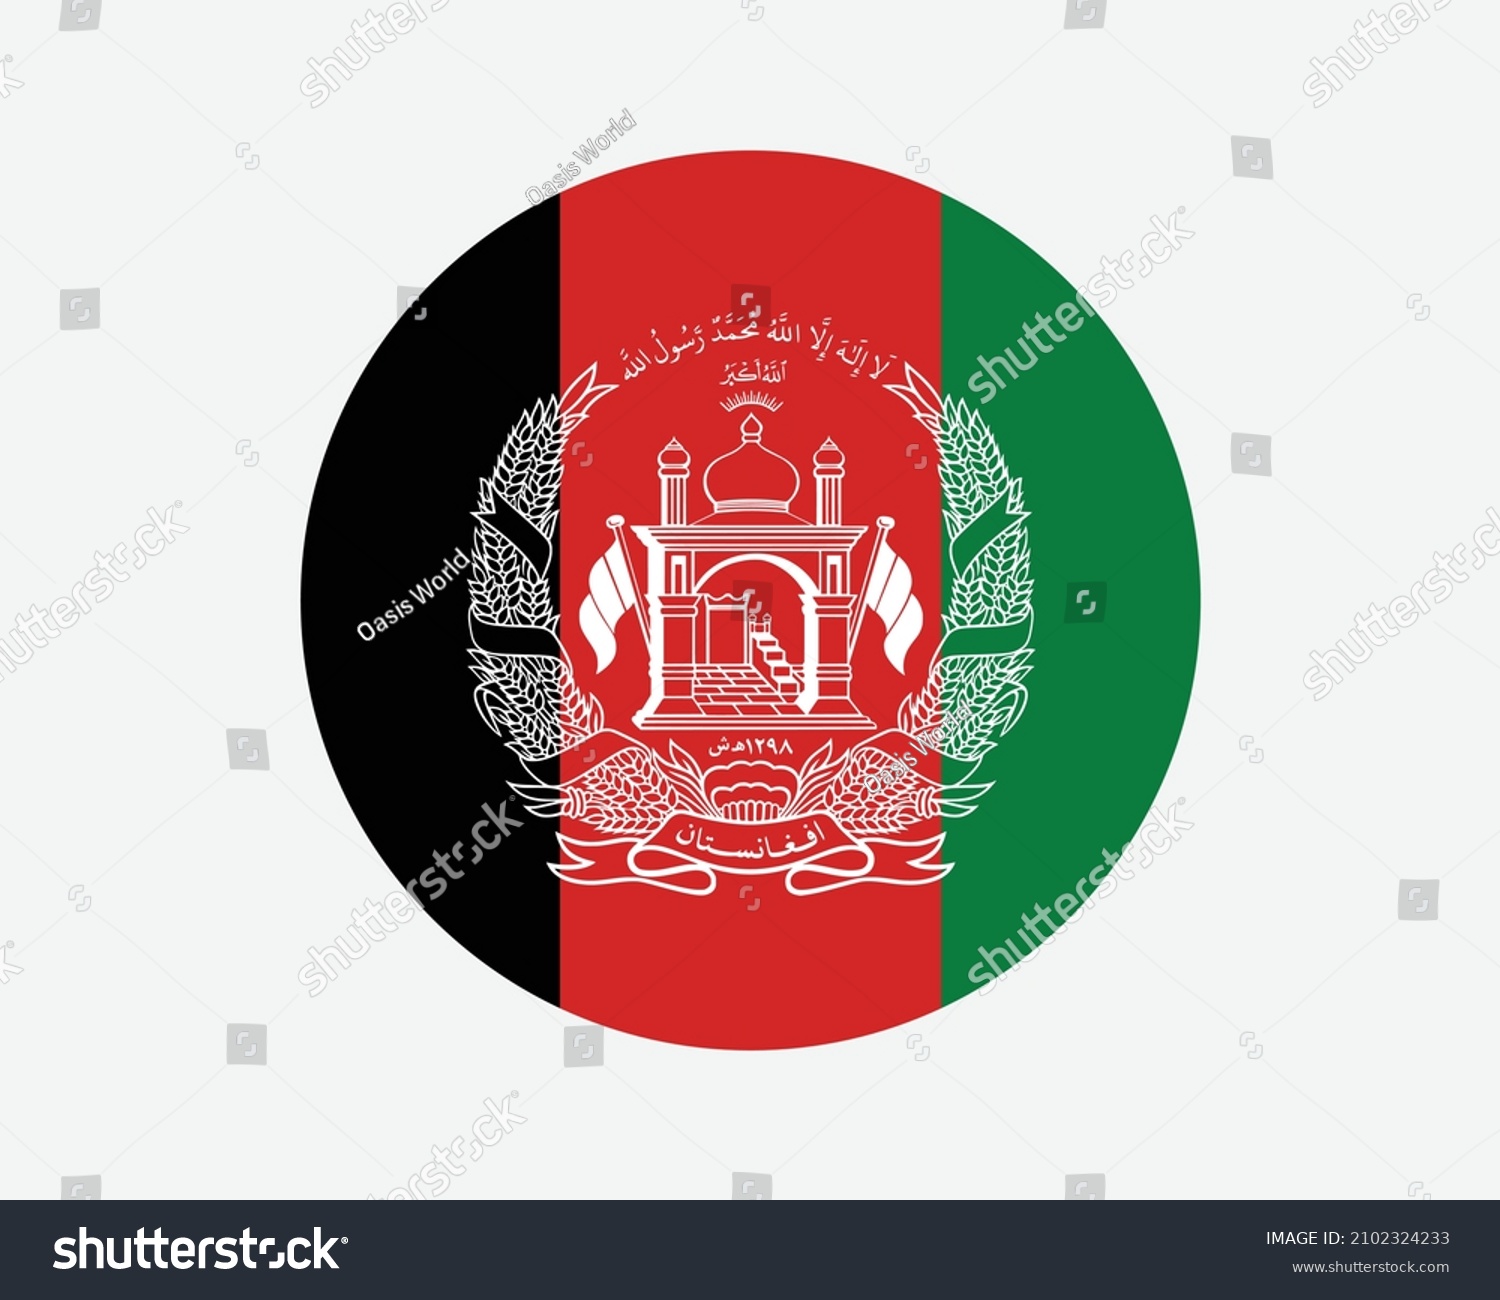 SVG of Afghanistan (Islamic Republic) Round Country Flag. Circular Afghan National Flag. Afghanistan Circle Shape Button Banner. EPS Vector Illustration. svg